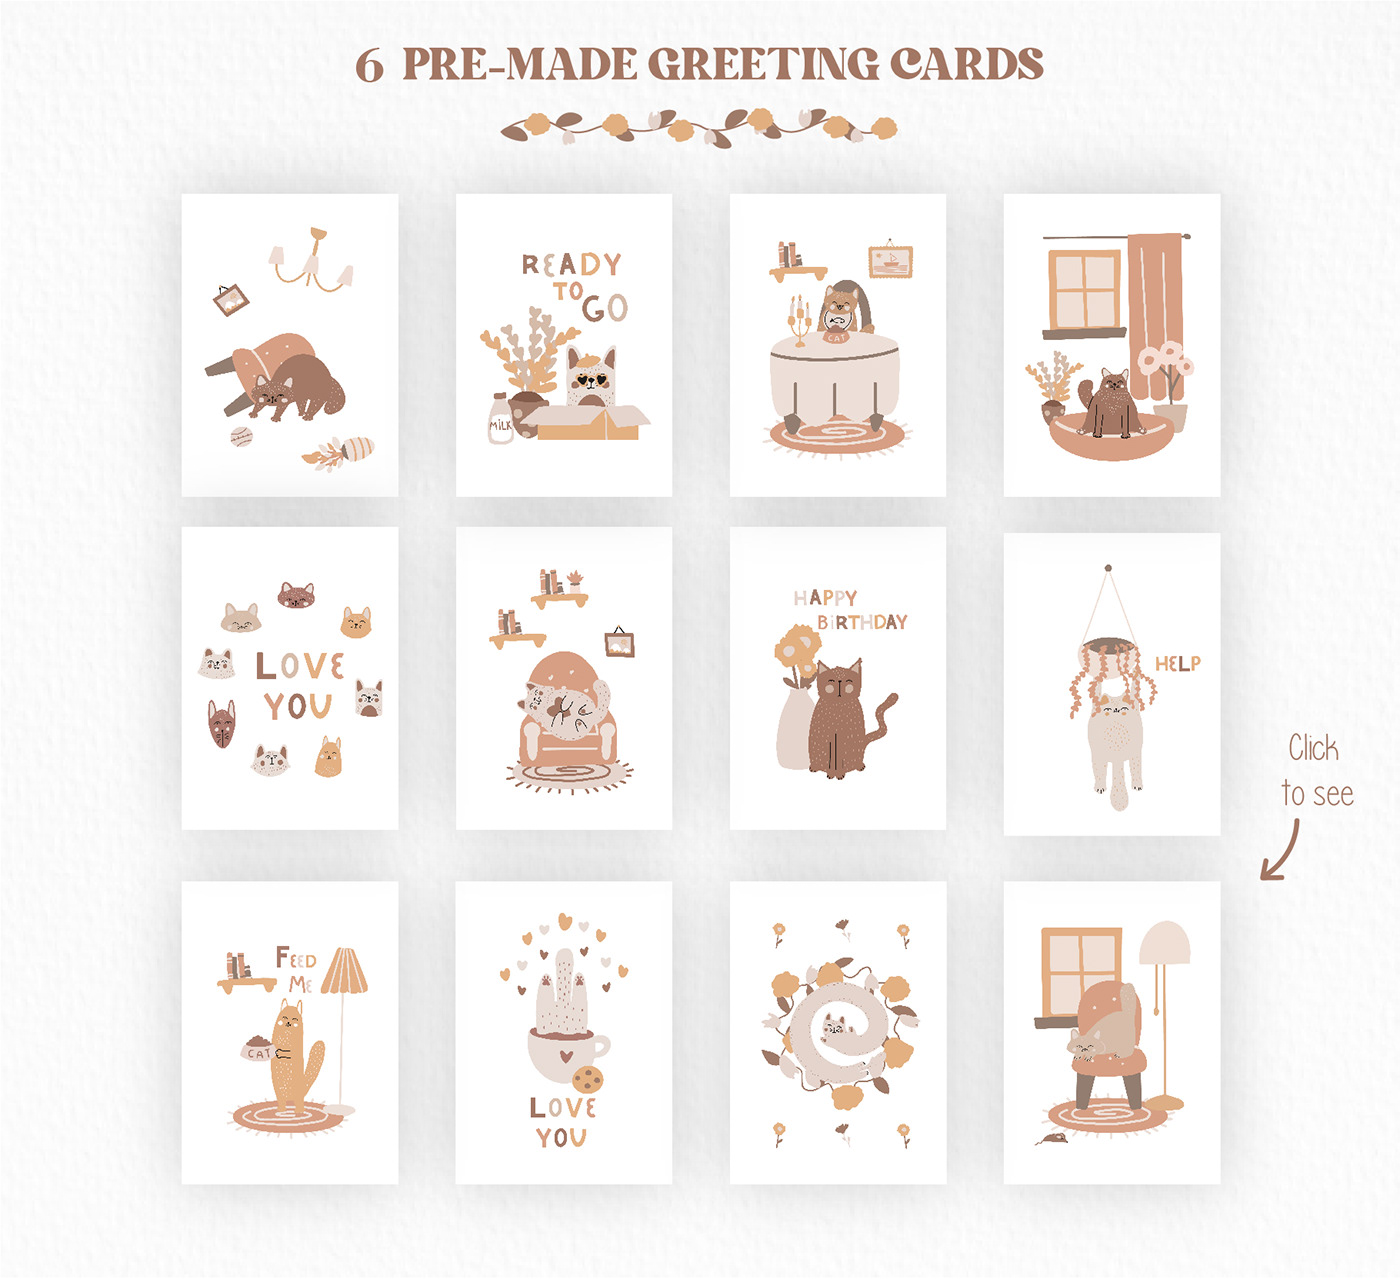 cats creative market Drawing  hand-drawn ILLUSTRATION  pattern print Procreate stickers vector